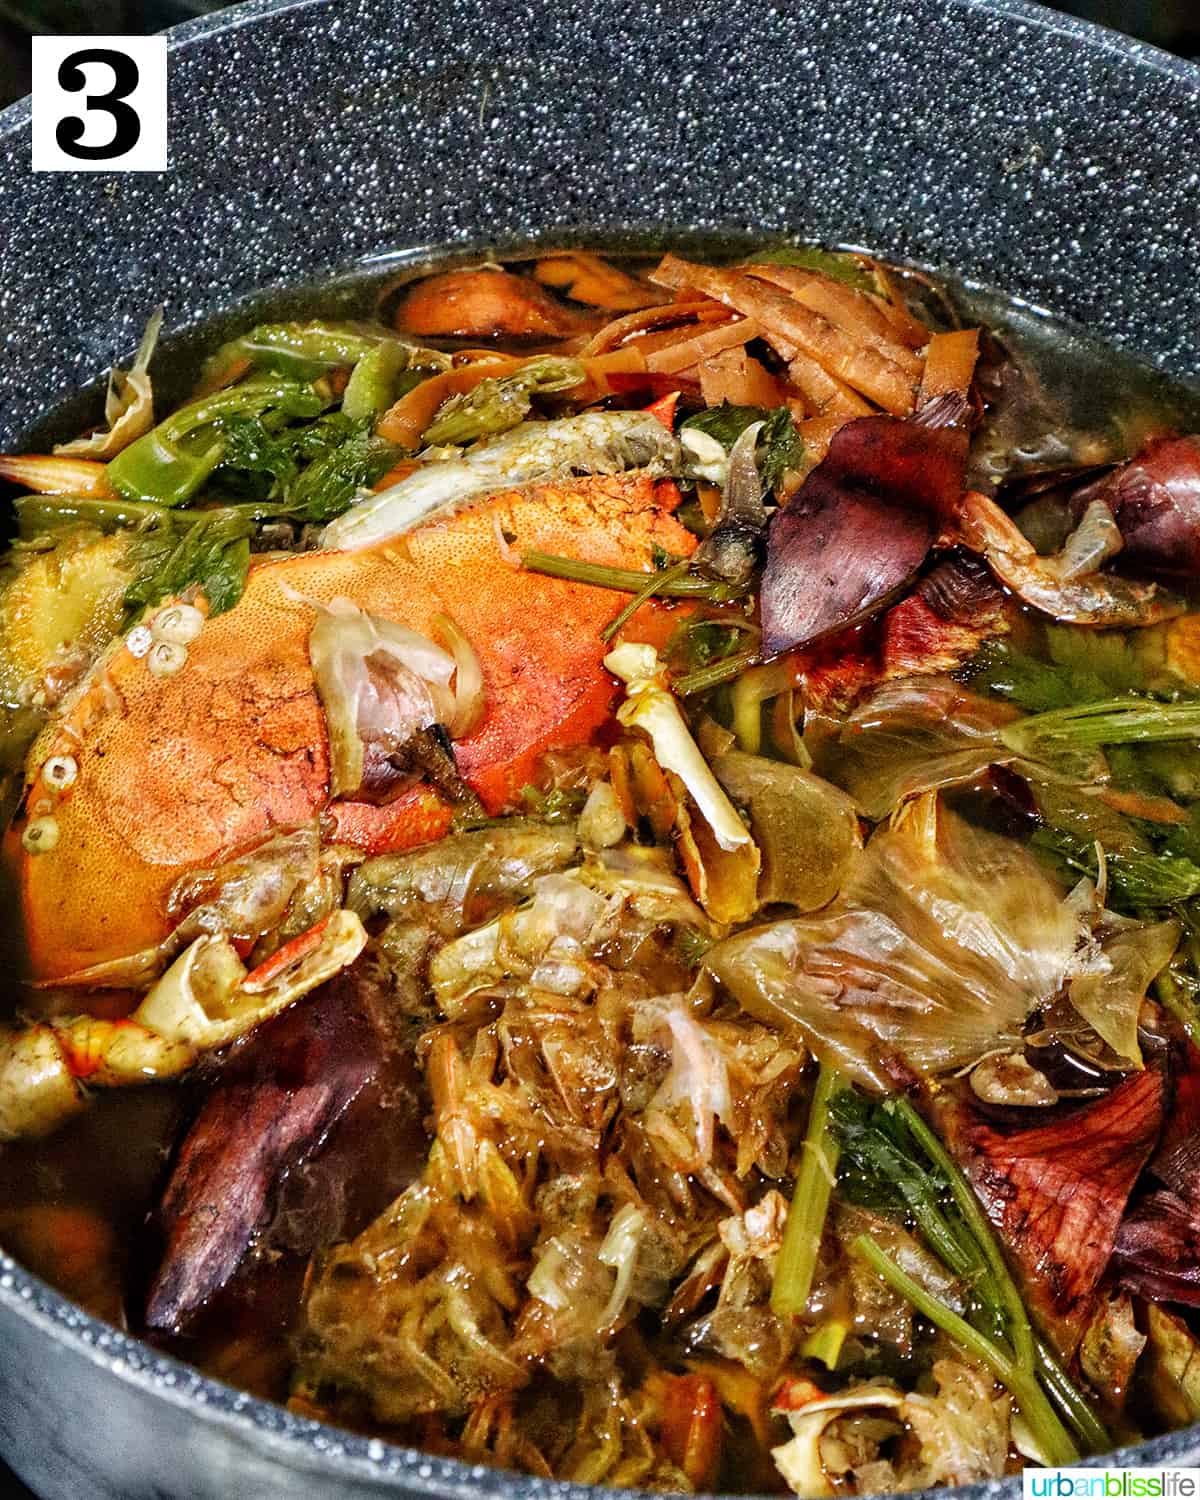 large stockpot with crab stock cooking in it.